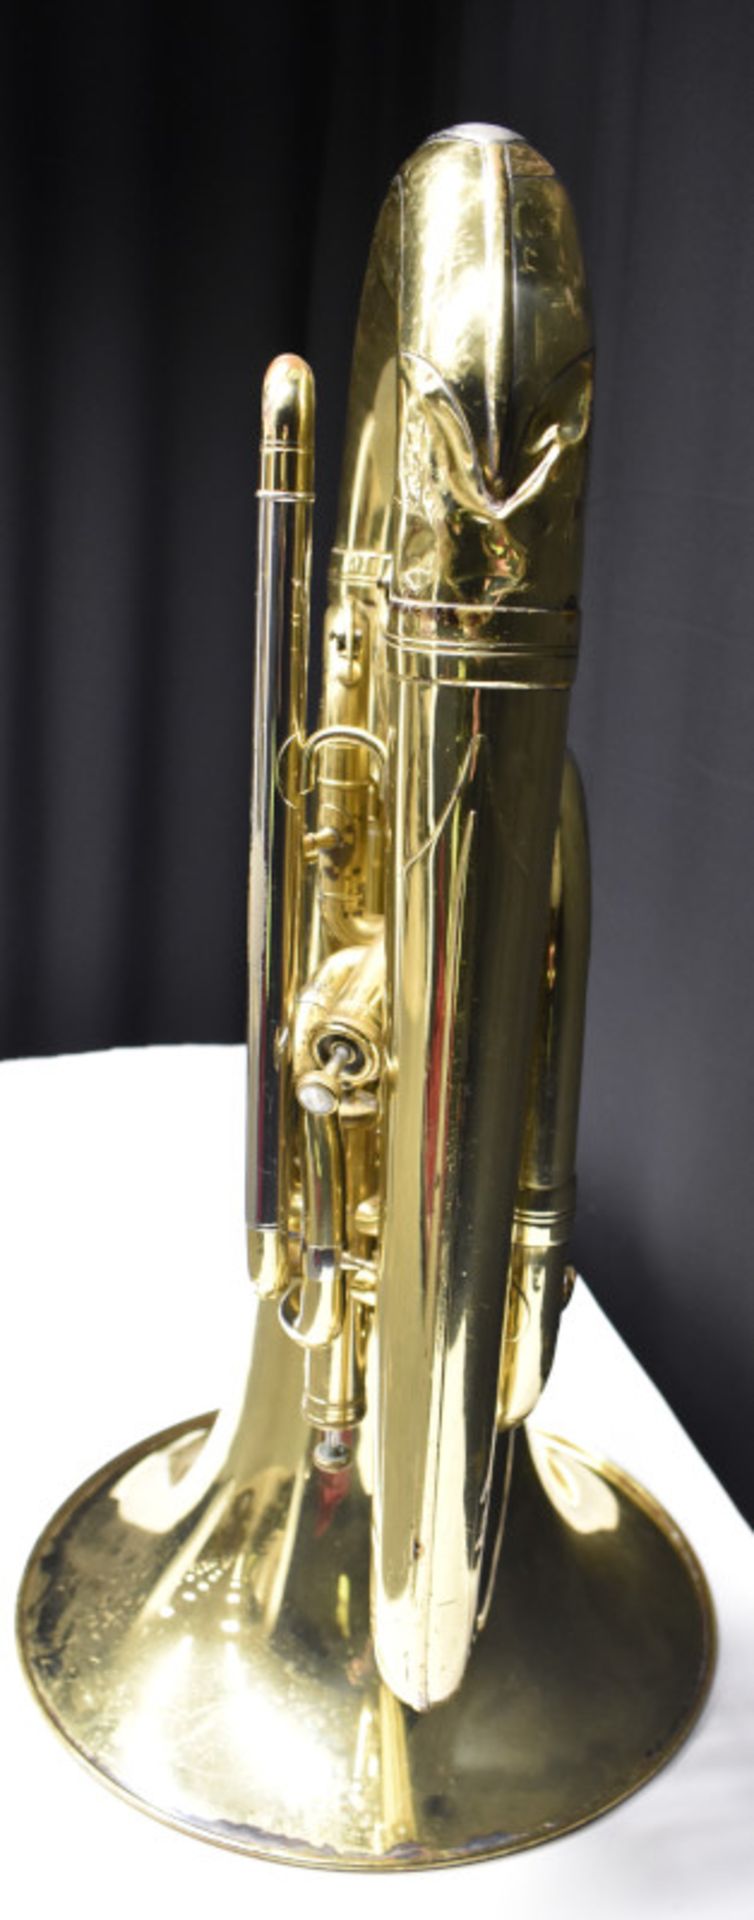 Besson Sovereign 982 Tuba (finger button stuck in place) in Besson case (missing wheel) - - Image 13 of 24